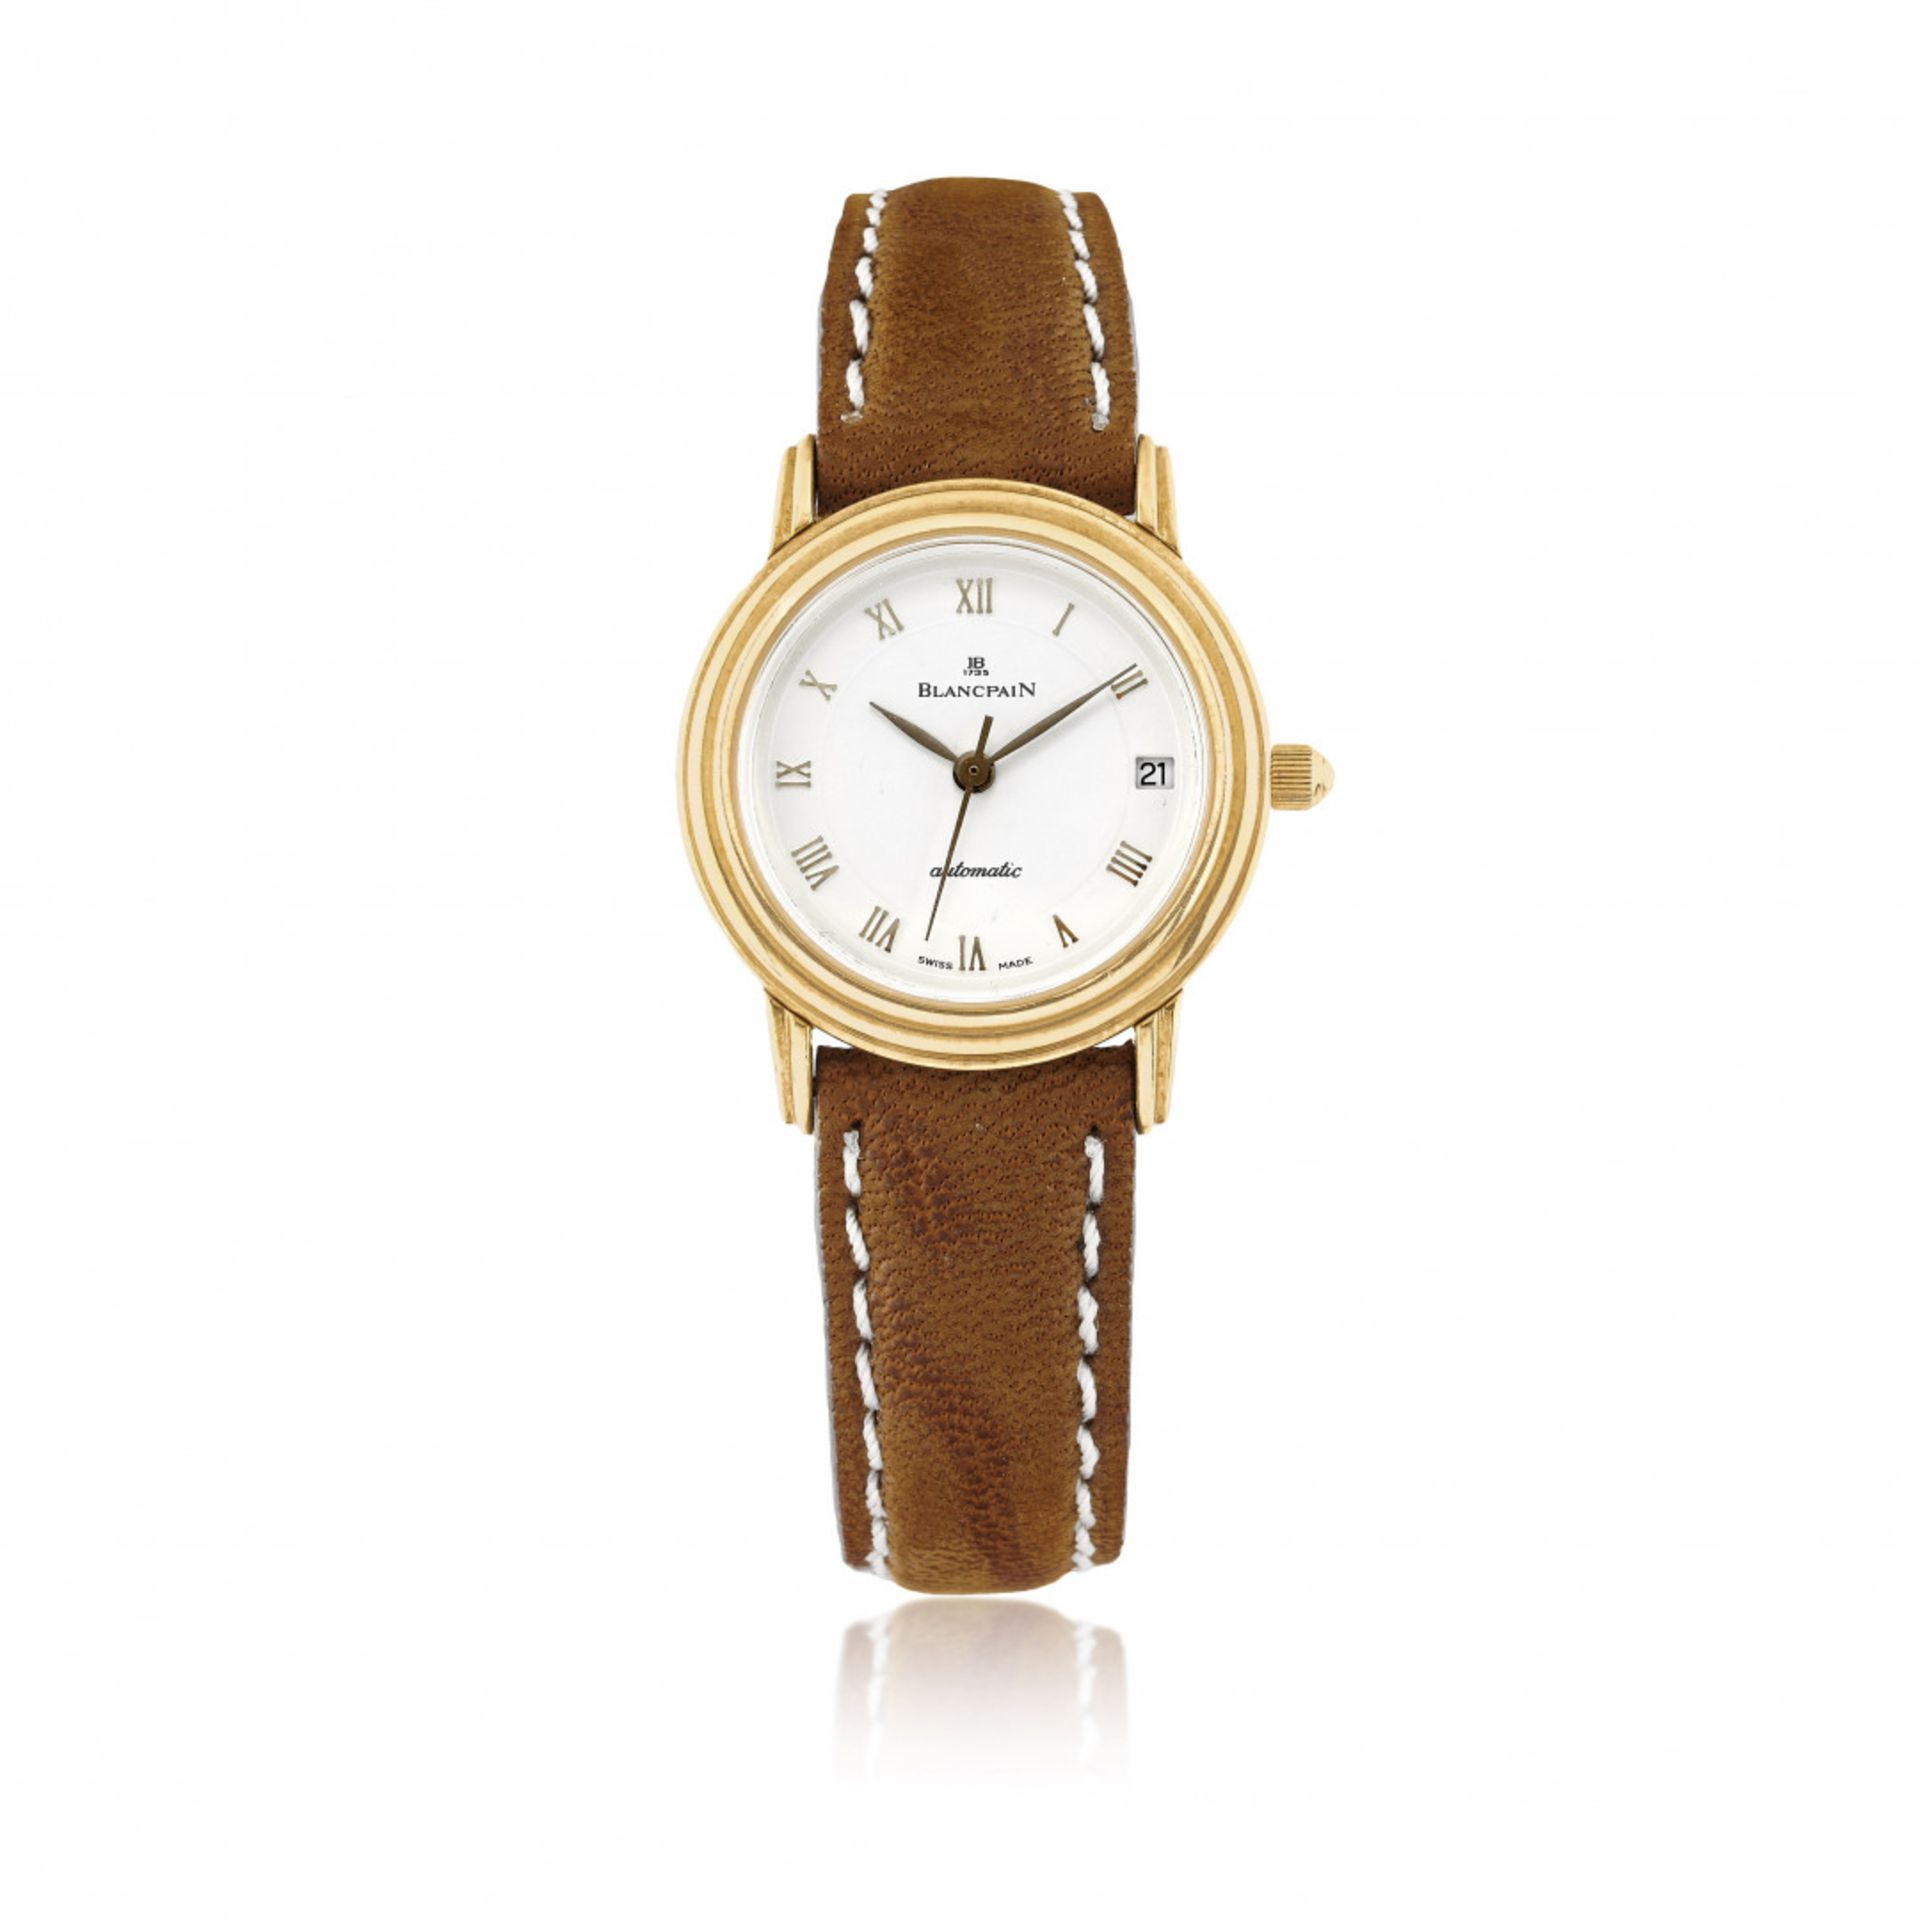 BLANCPAIN VILLERET "JB 1735" AUTOMATIC IN GOLD, 90S